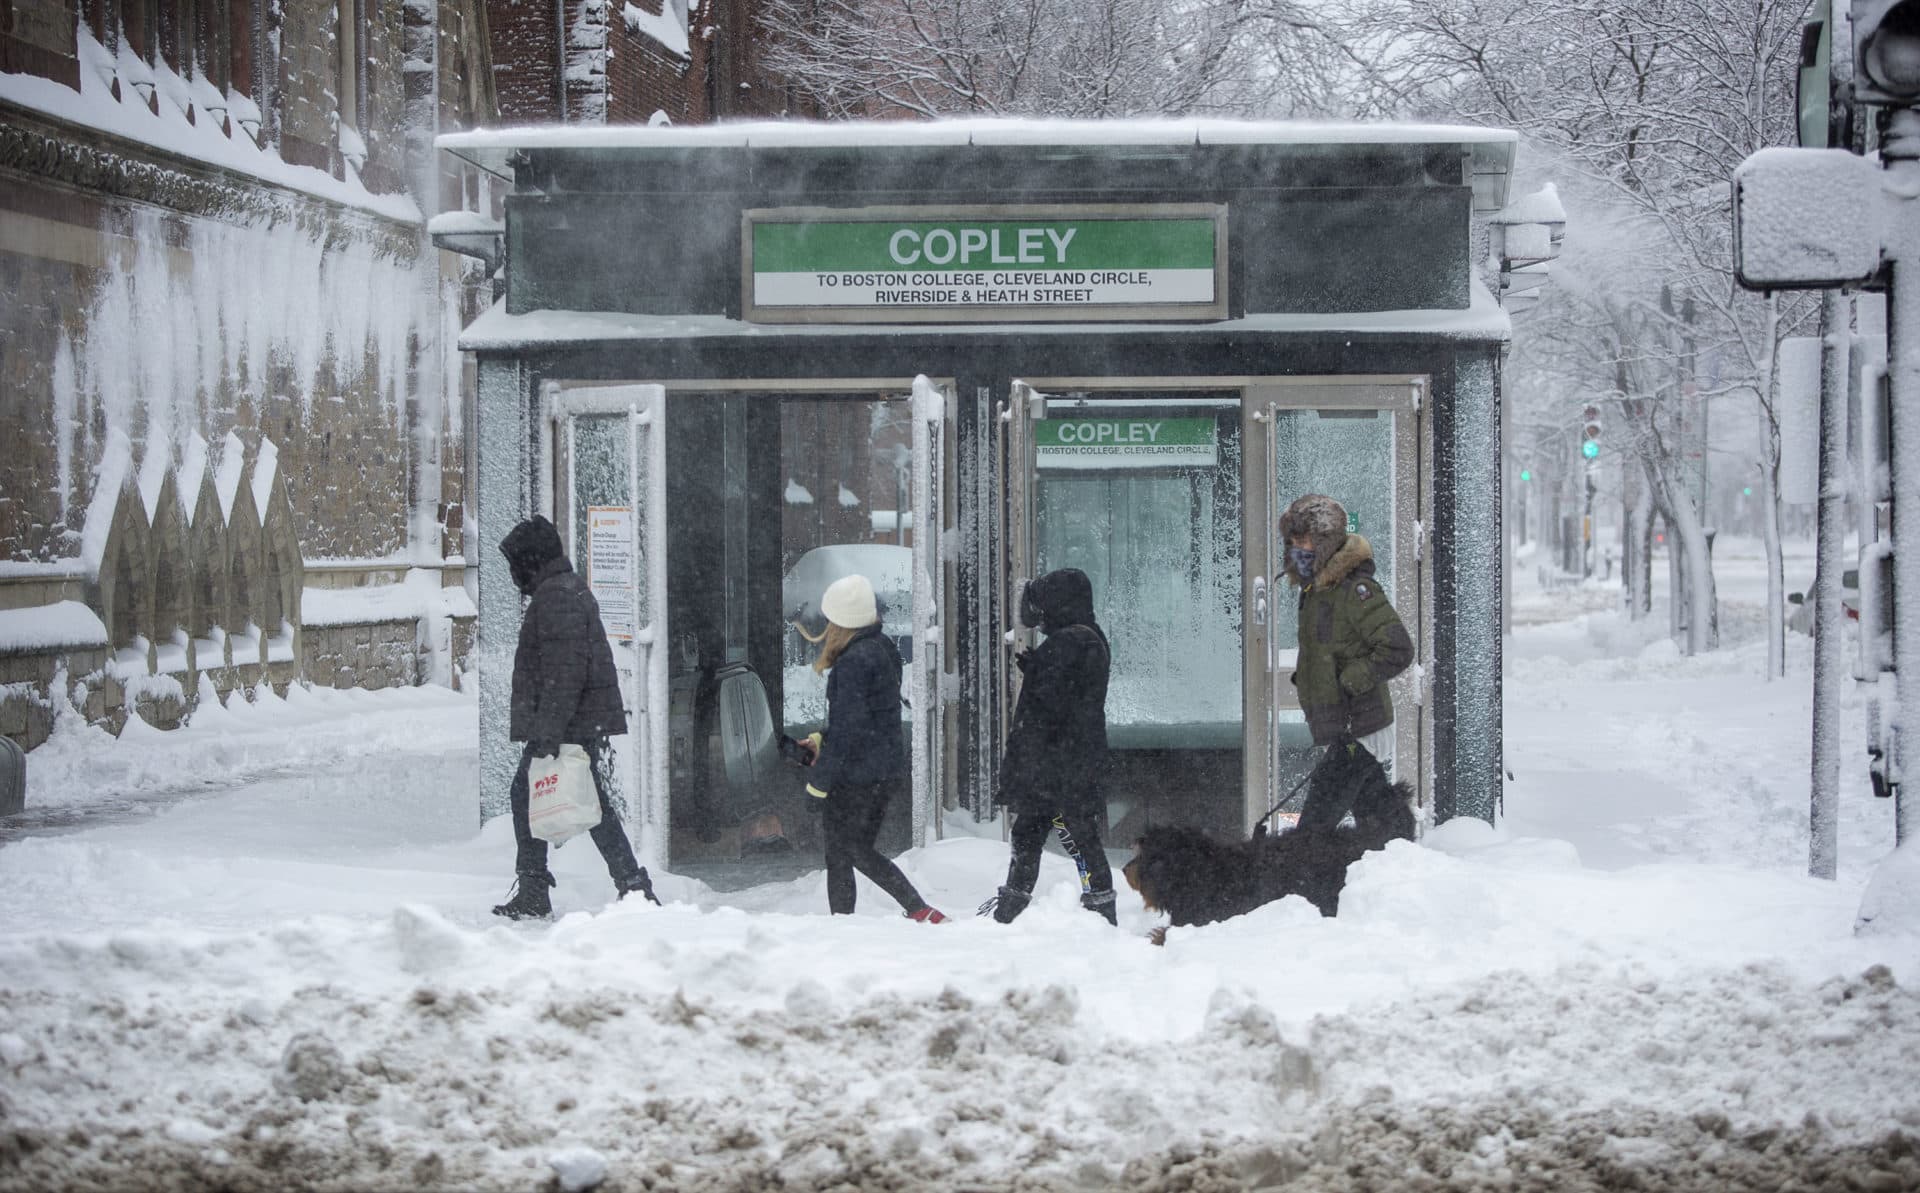 Snow blows off the roof of the entrance to the Copley MBTA station, as the storm comes to an end. (Robin Lubbock/WBUR)